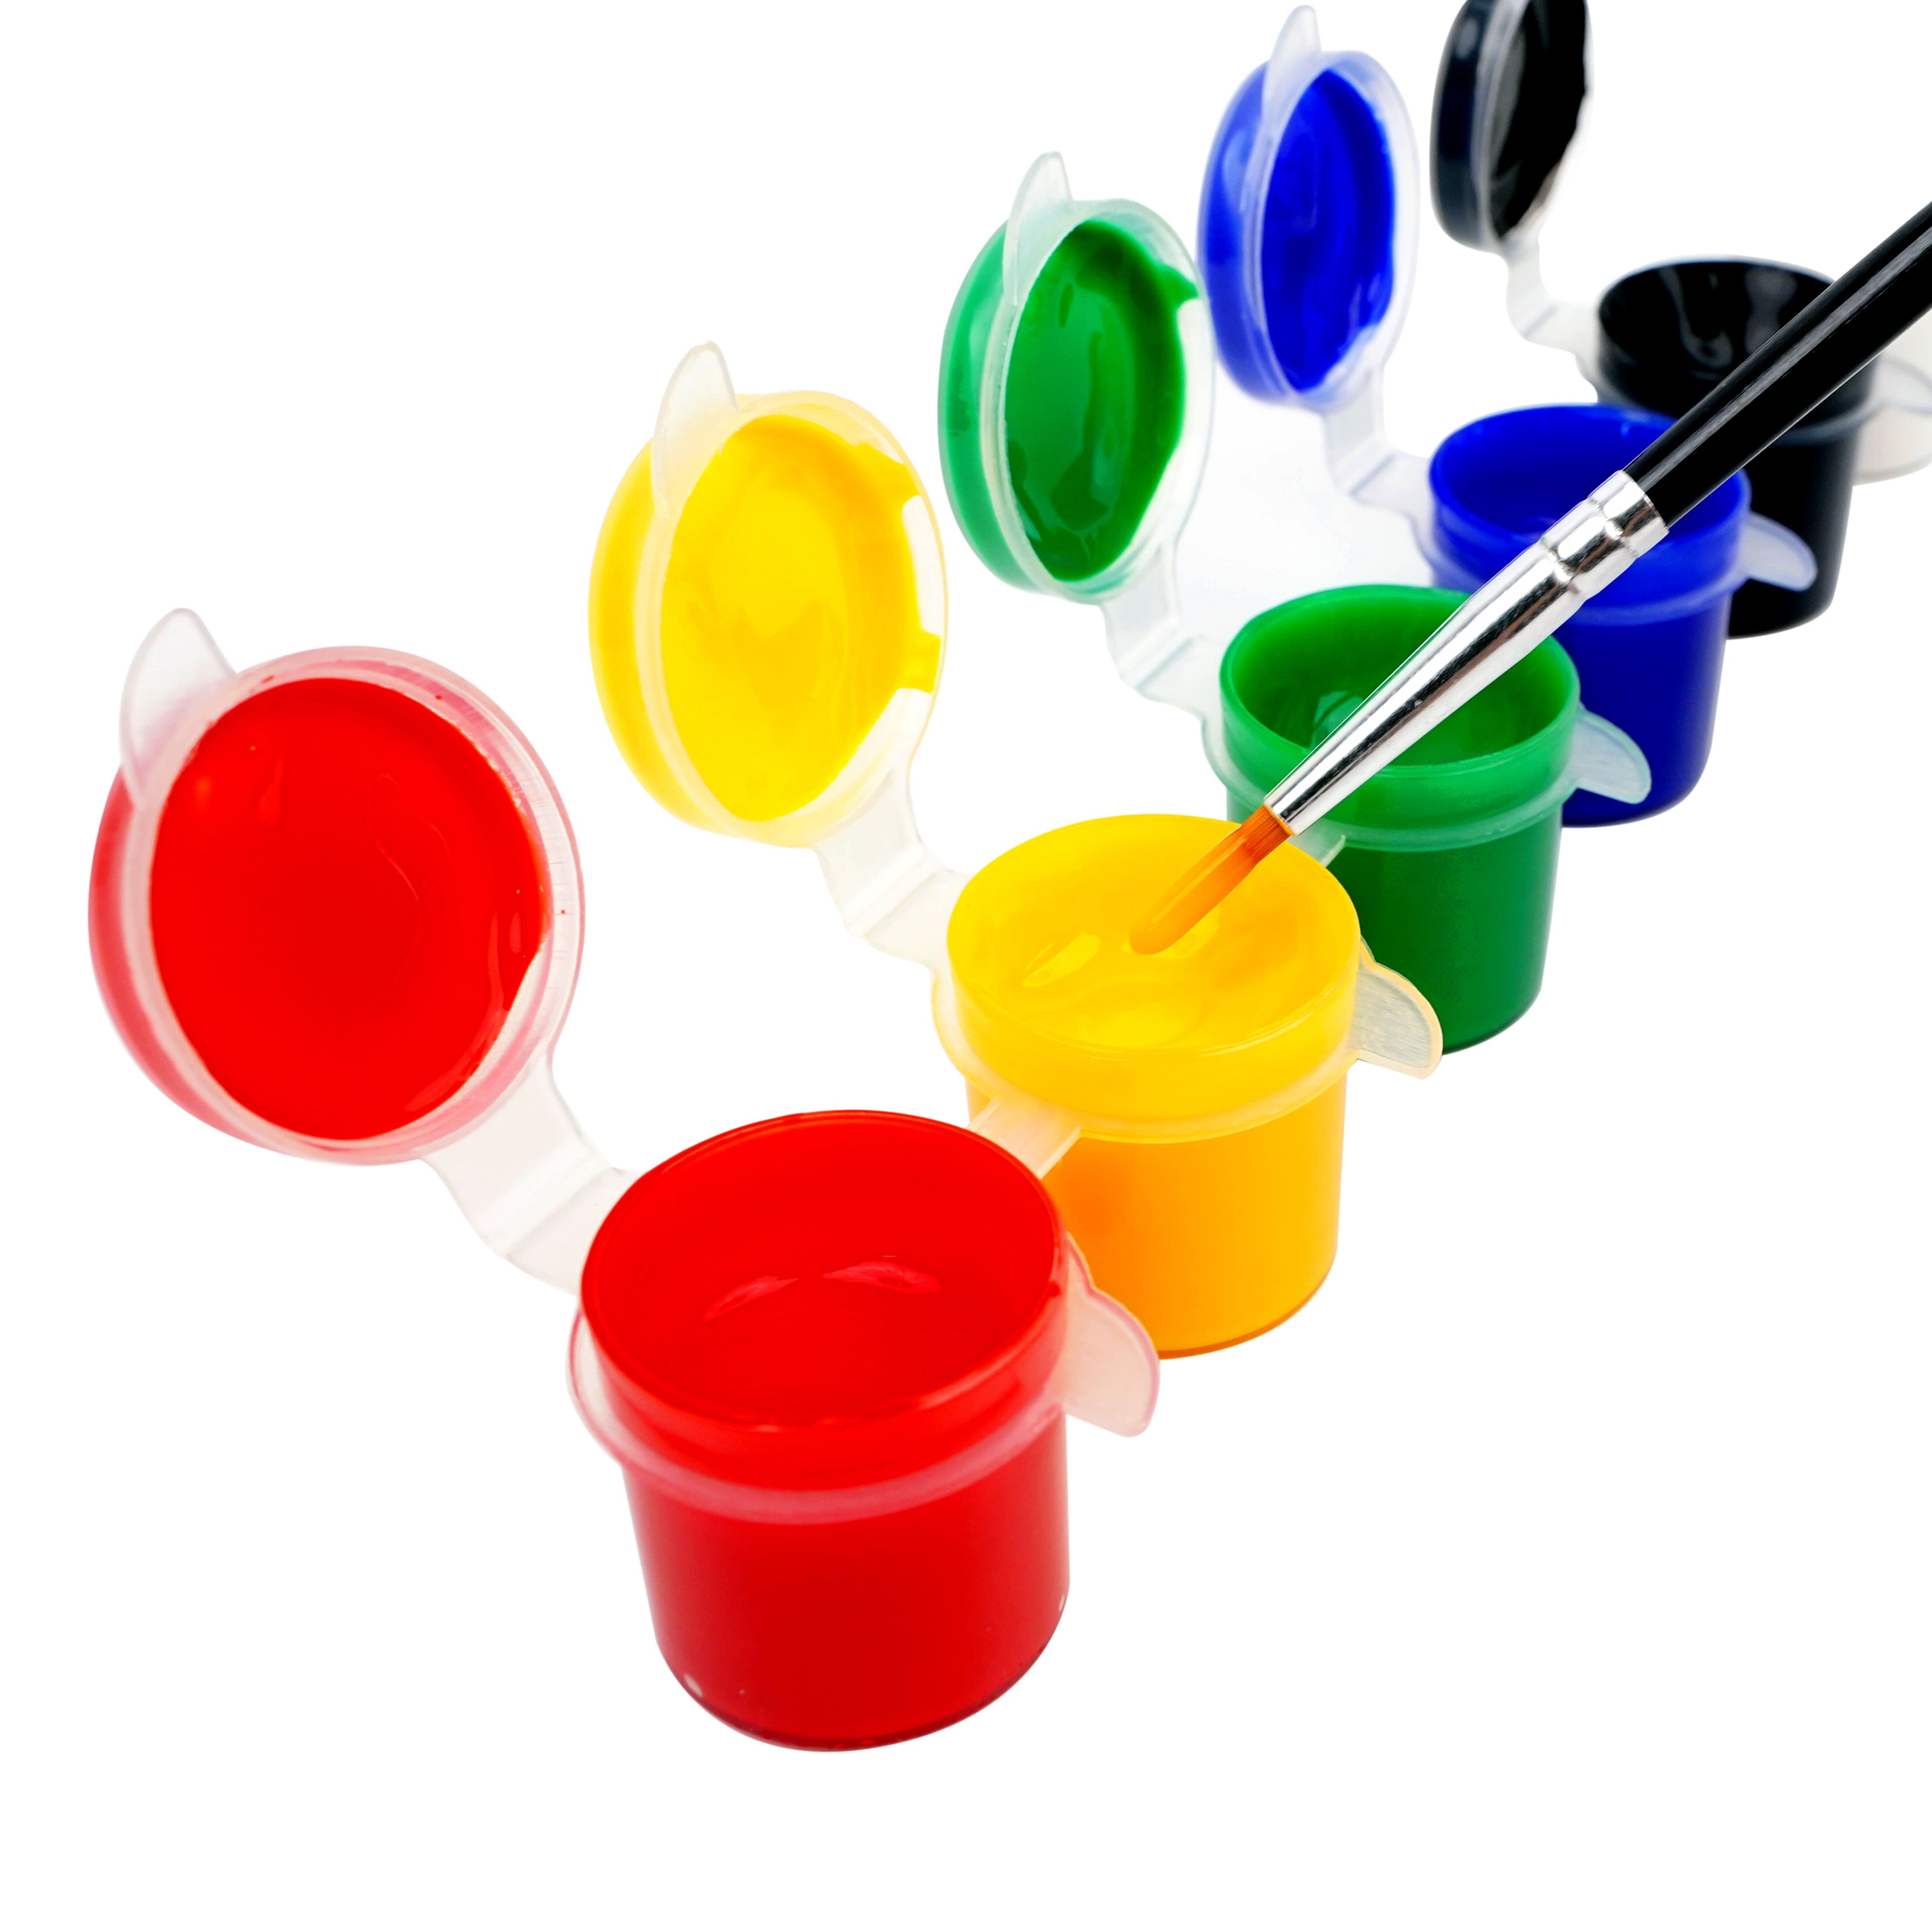 12 Packs: 18 ct. (216 total) Washable Paint Pots by Creatology™